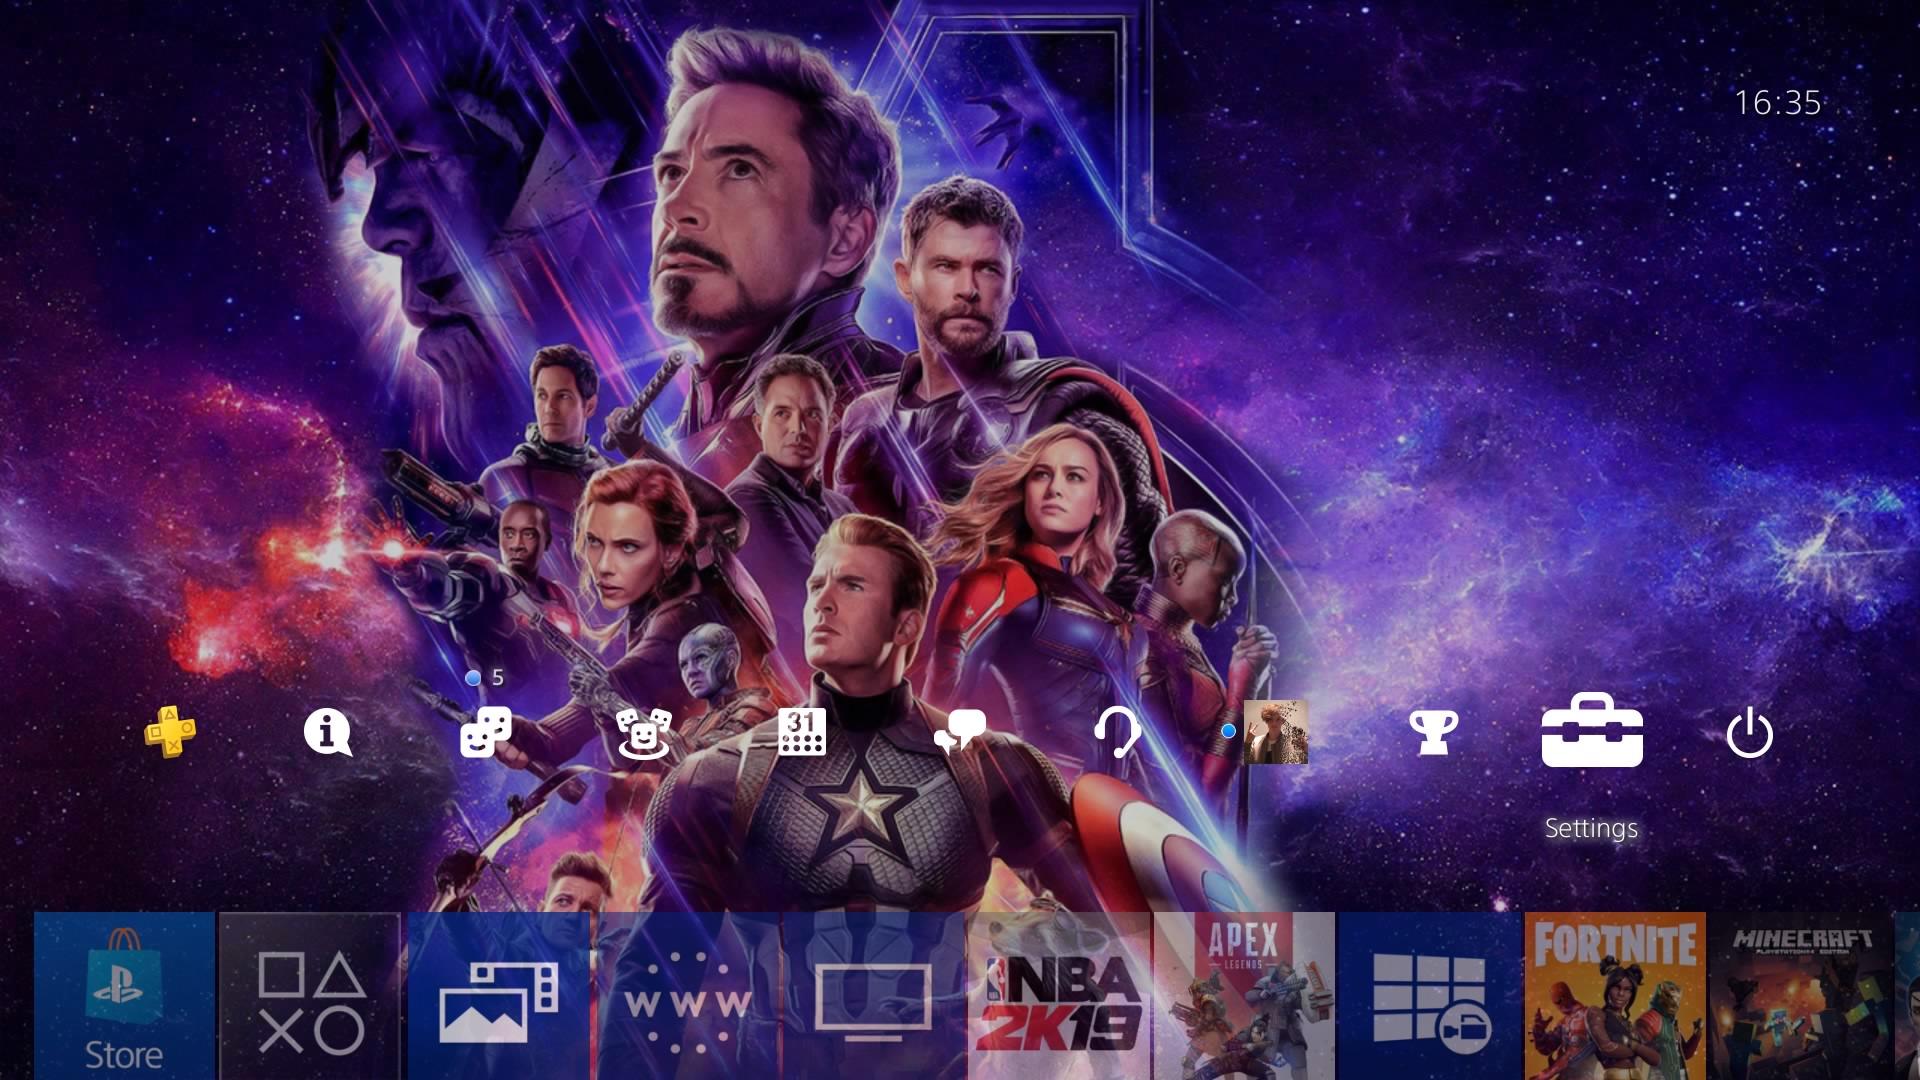 Avengers Endgame Ps4 Custom Theme Link And Instructions In